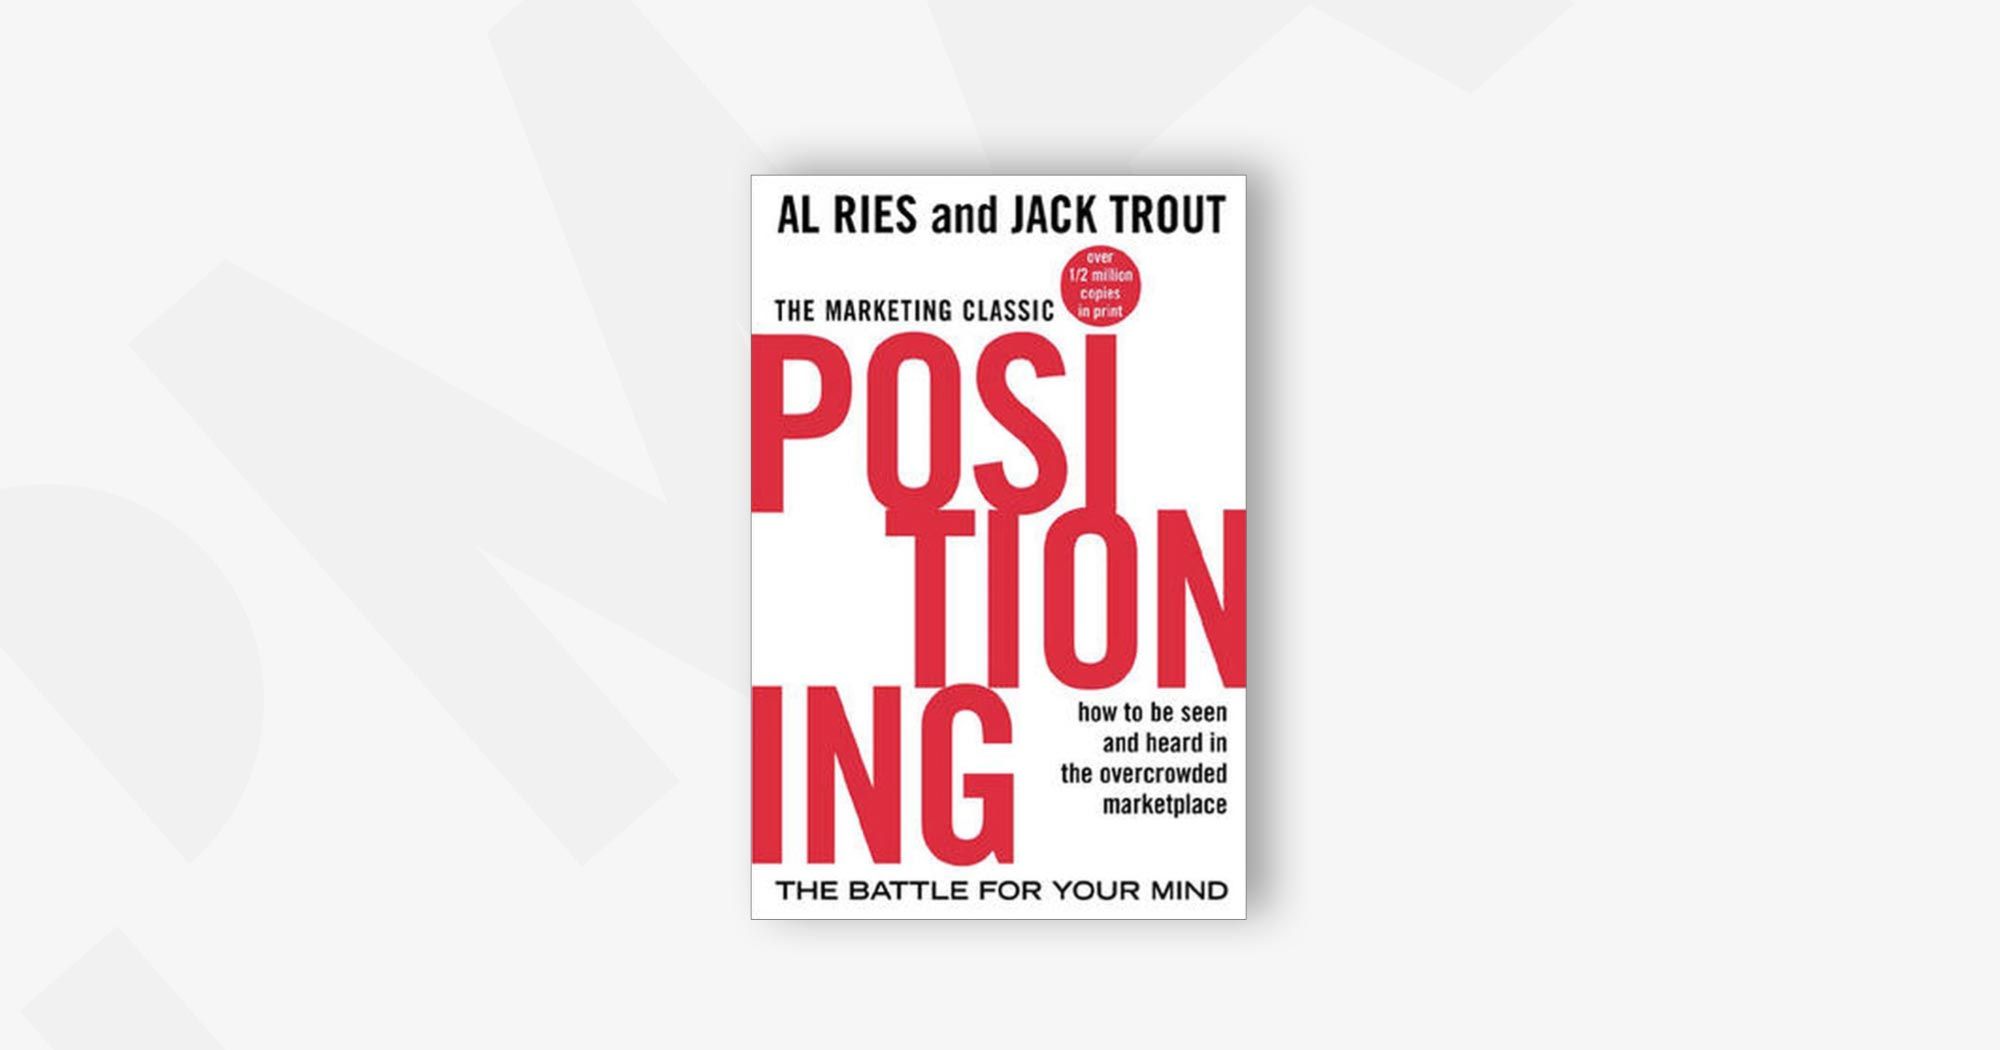 Positioning: The Battle for Your Mind – Al Ries and Jack Trout